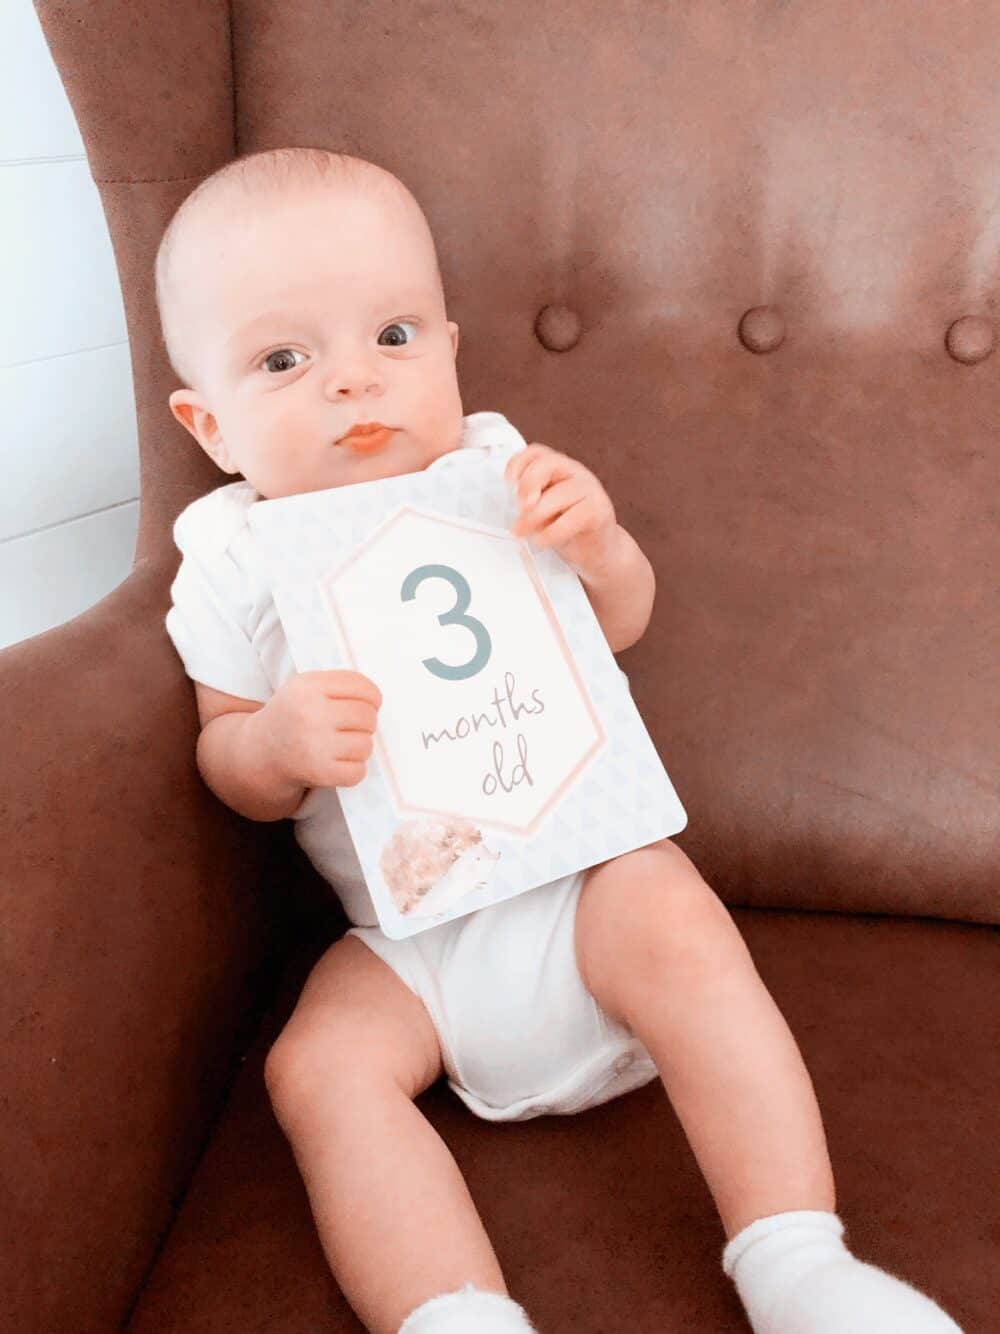 A baby is sitting in a brown chair holding a number sign.